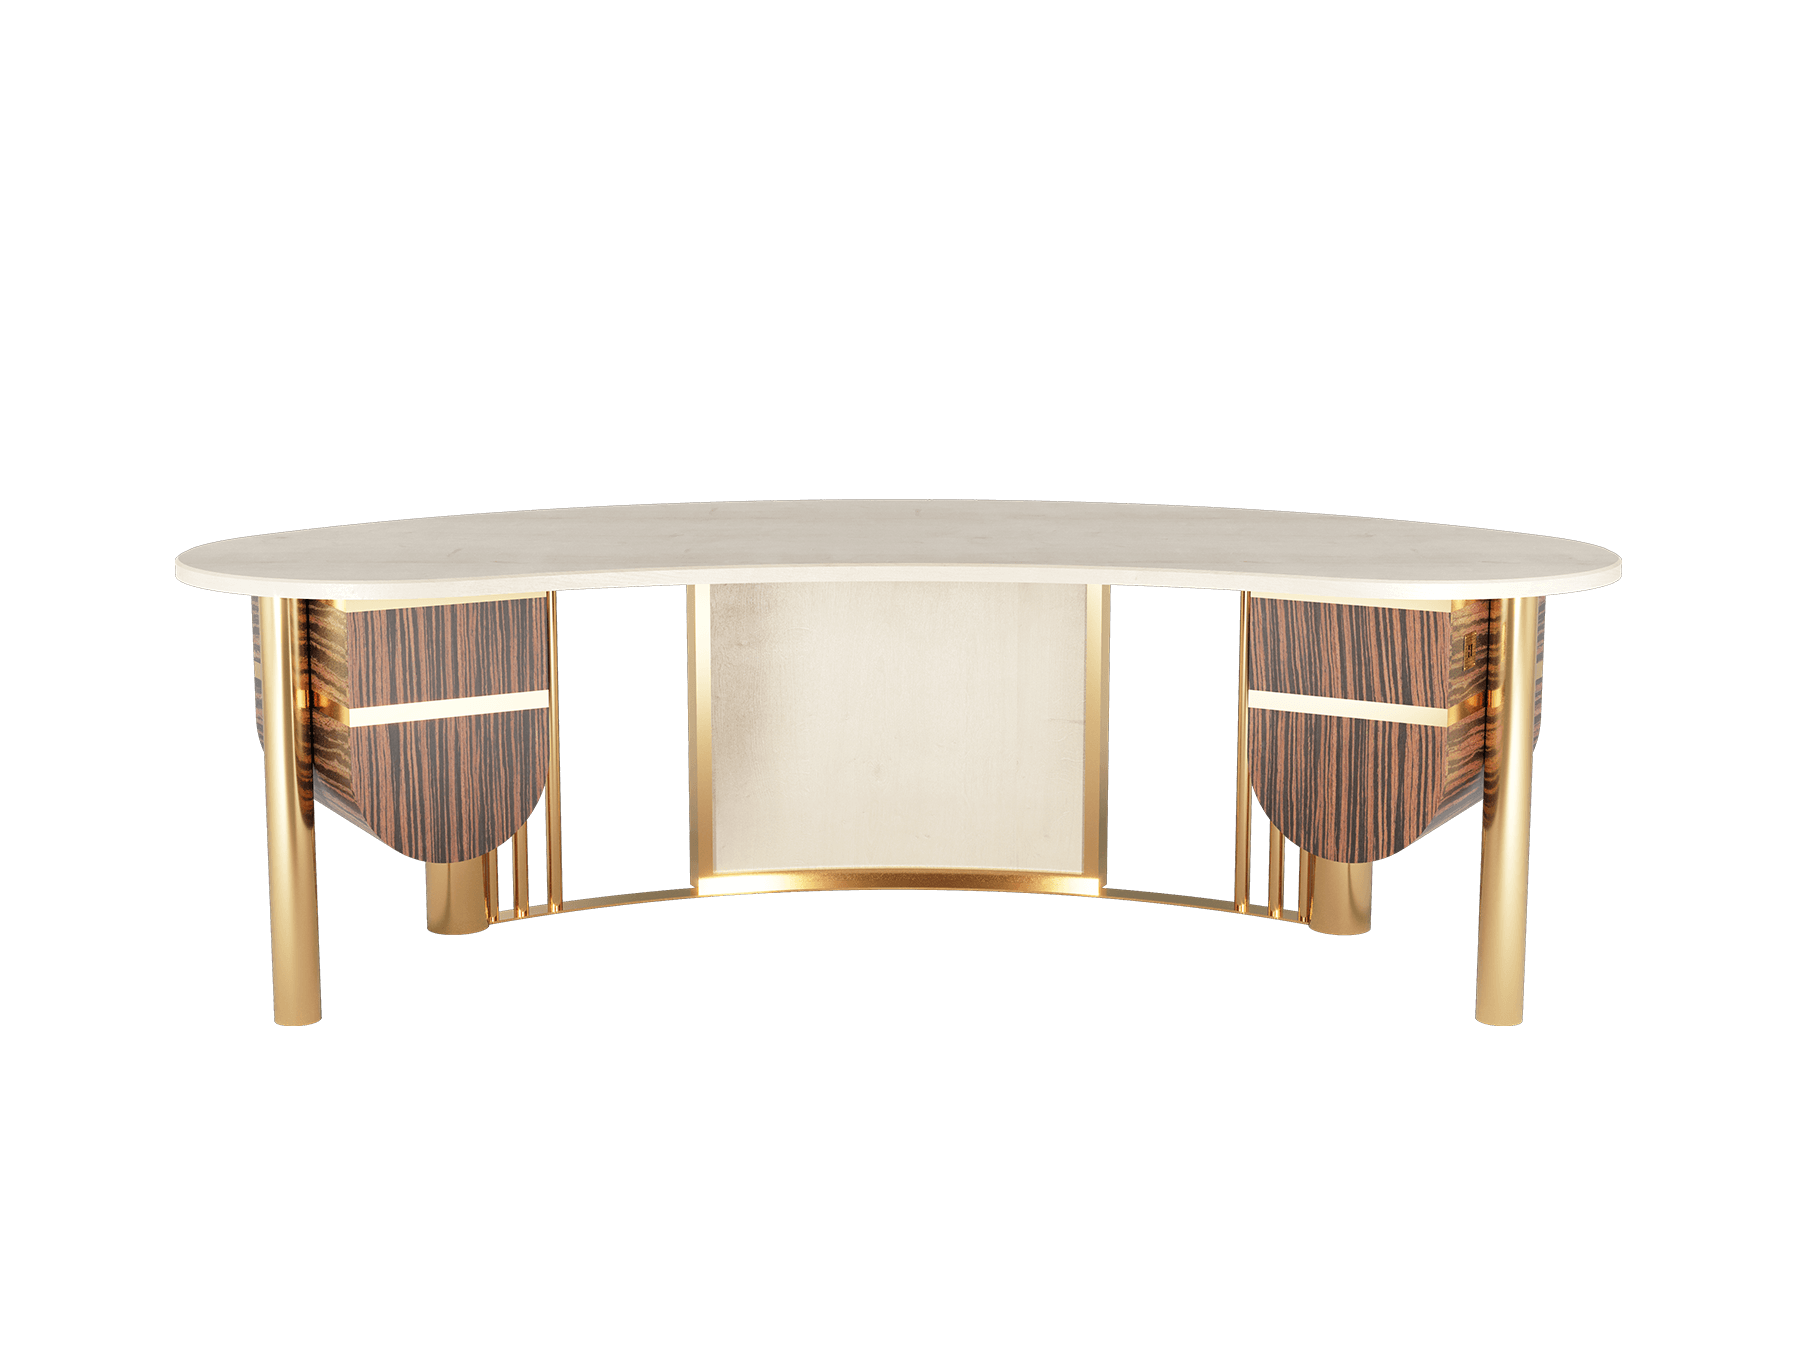 luxury office desk for sophisticated chic style